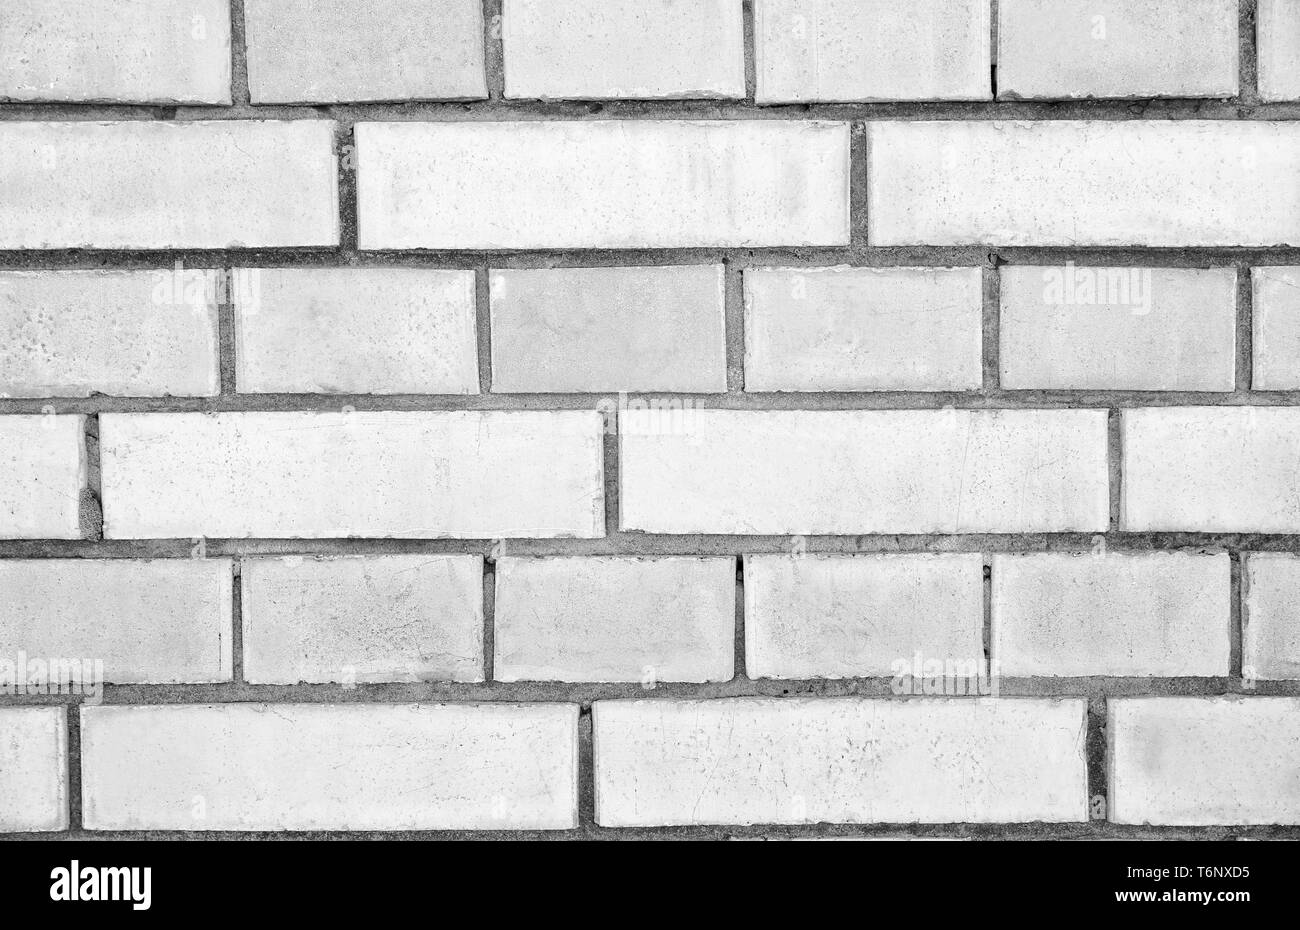 Texture of old brick wall as background Stock Photo